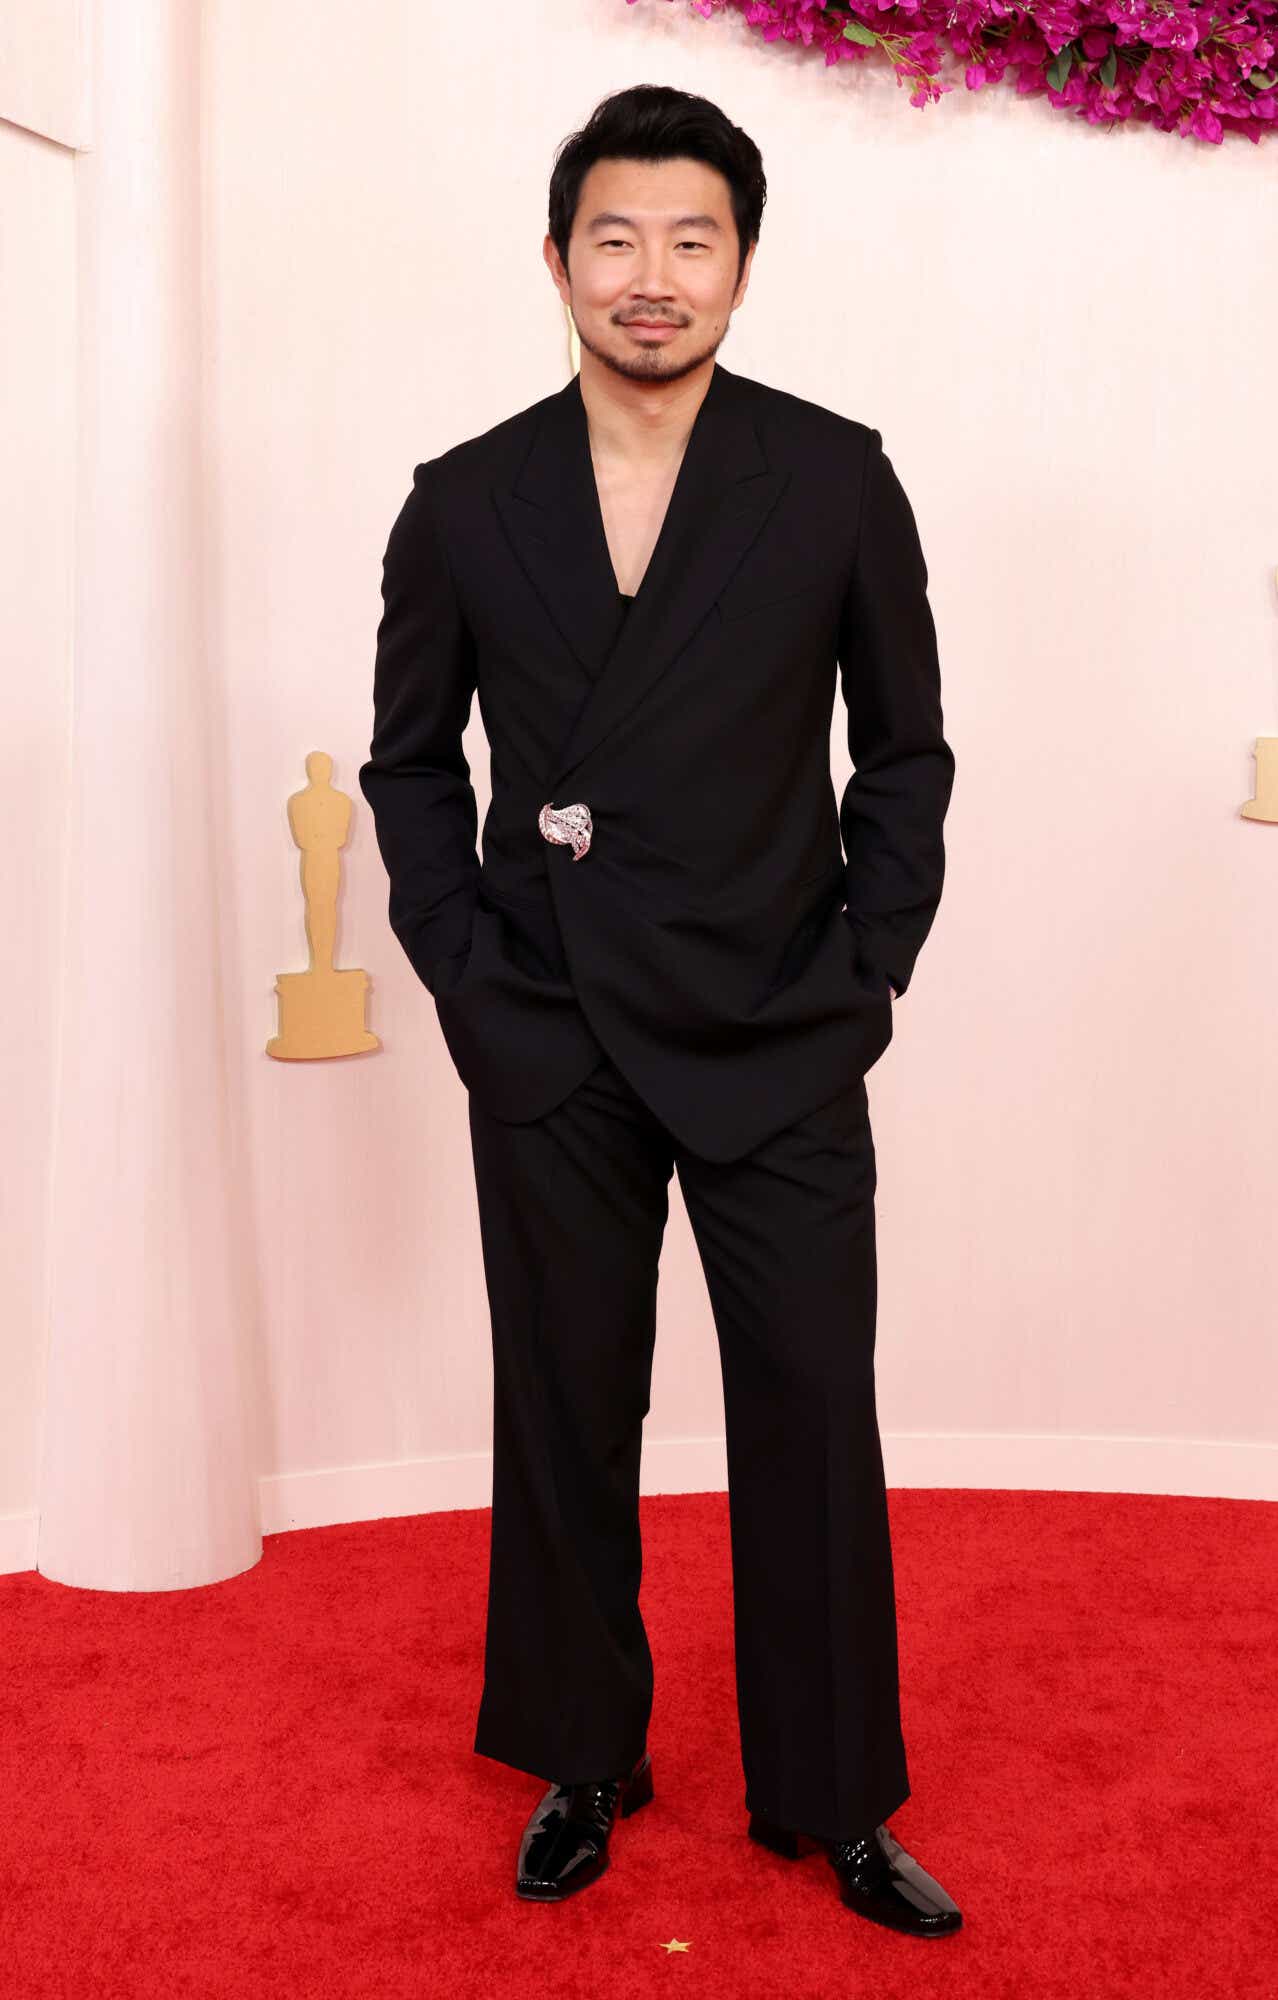 Simu Liu wears an all-black suit and shirt to the Oscars with a brooch.